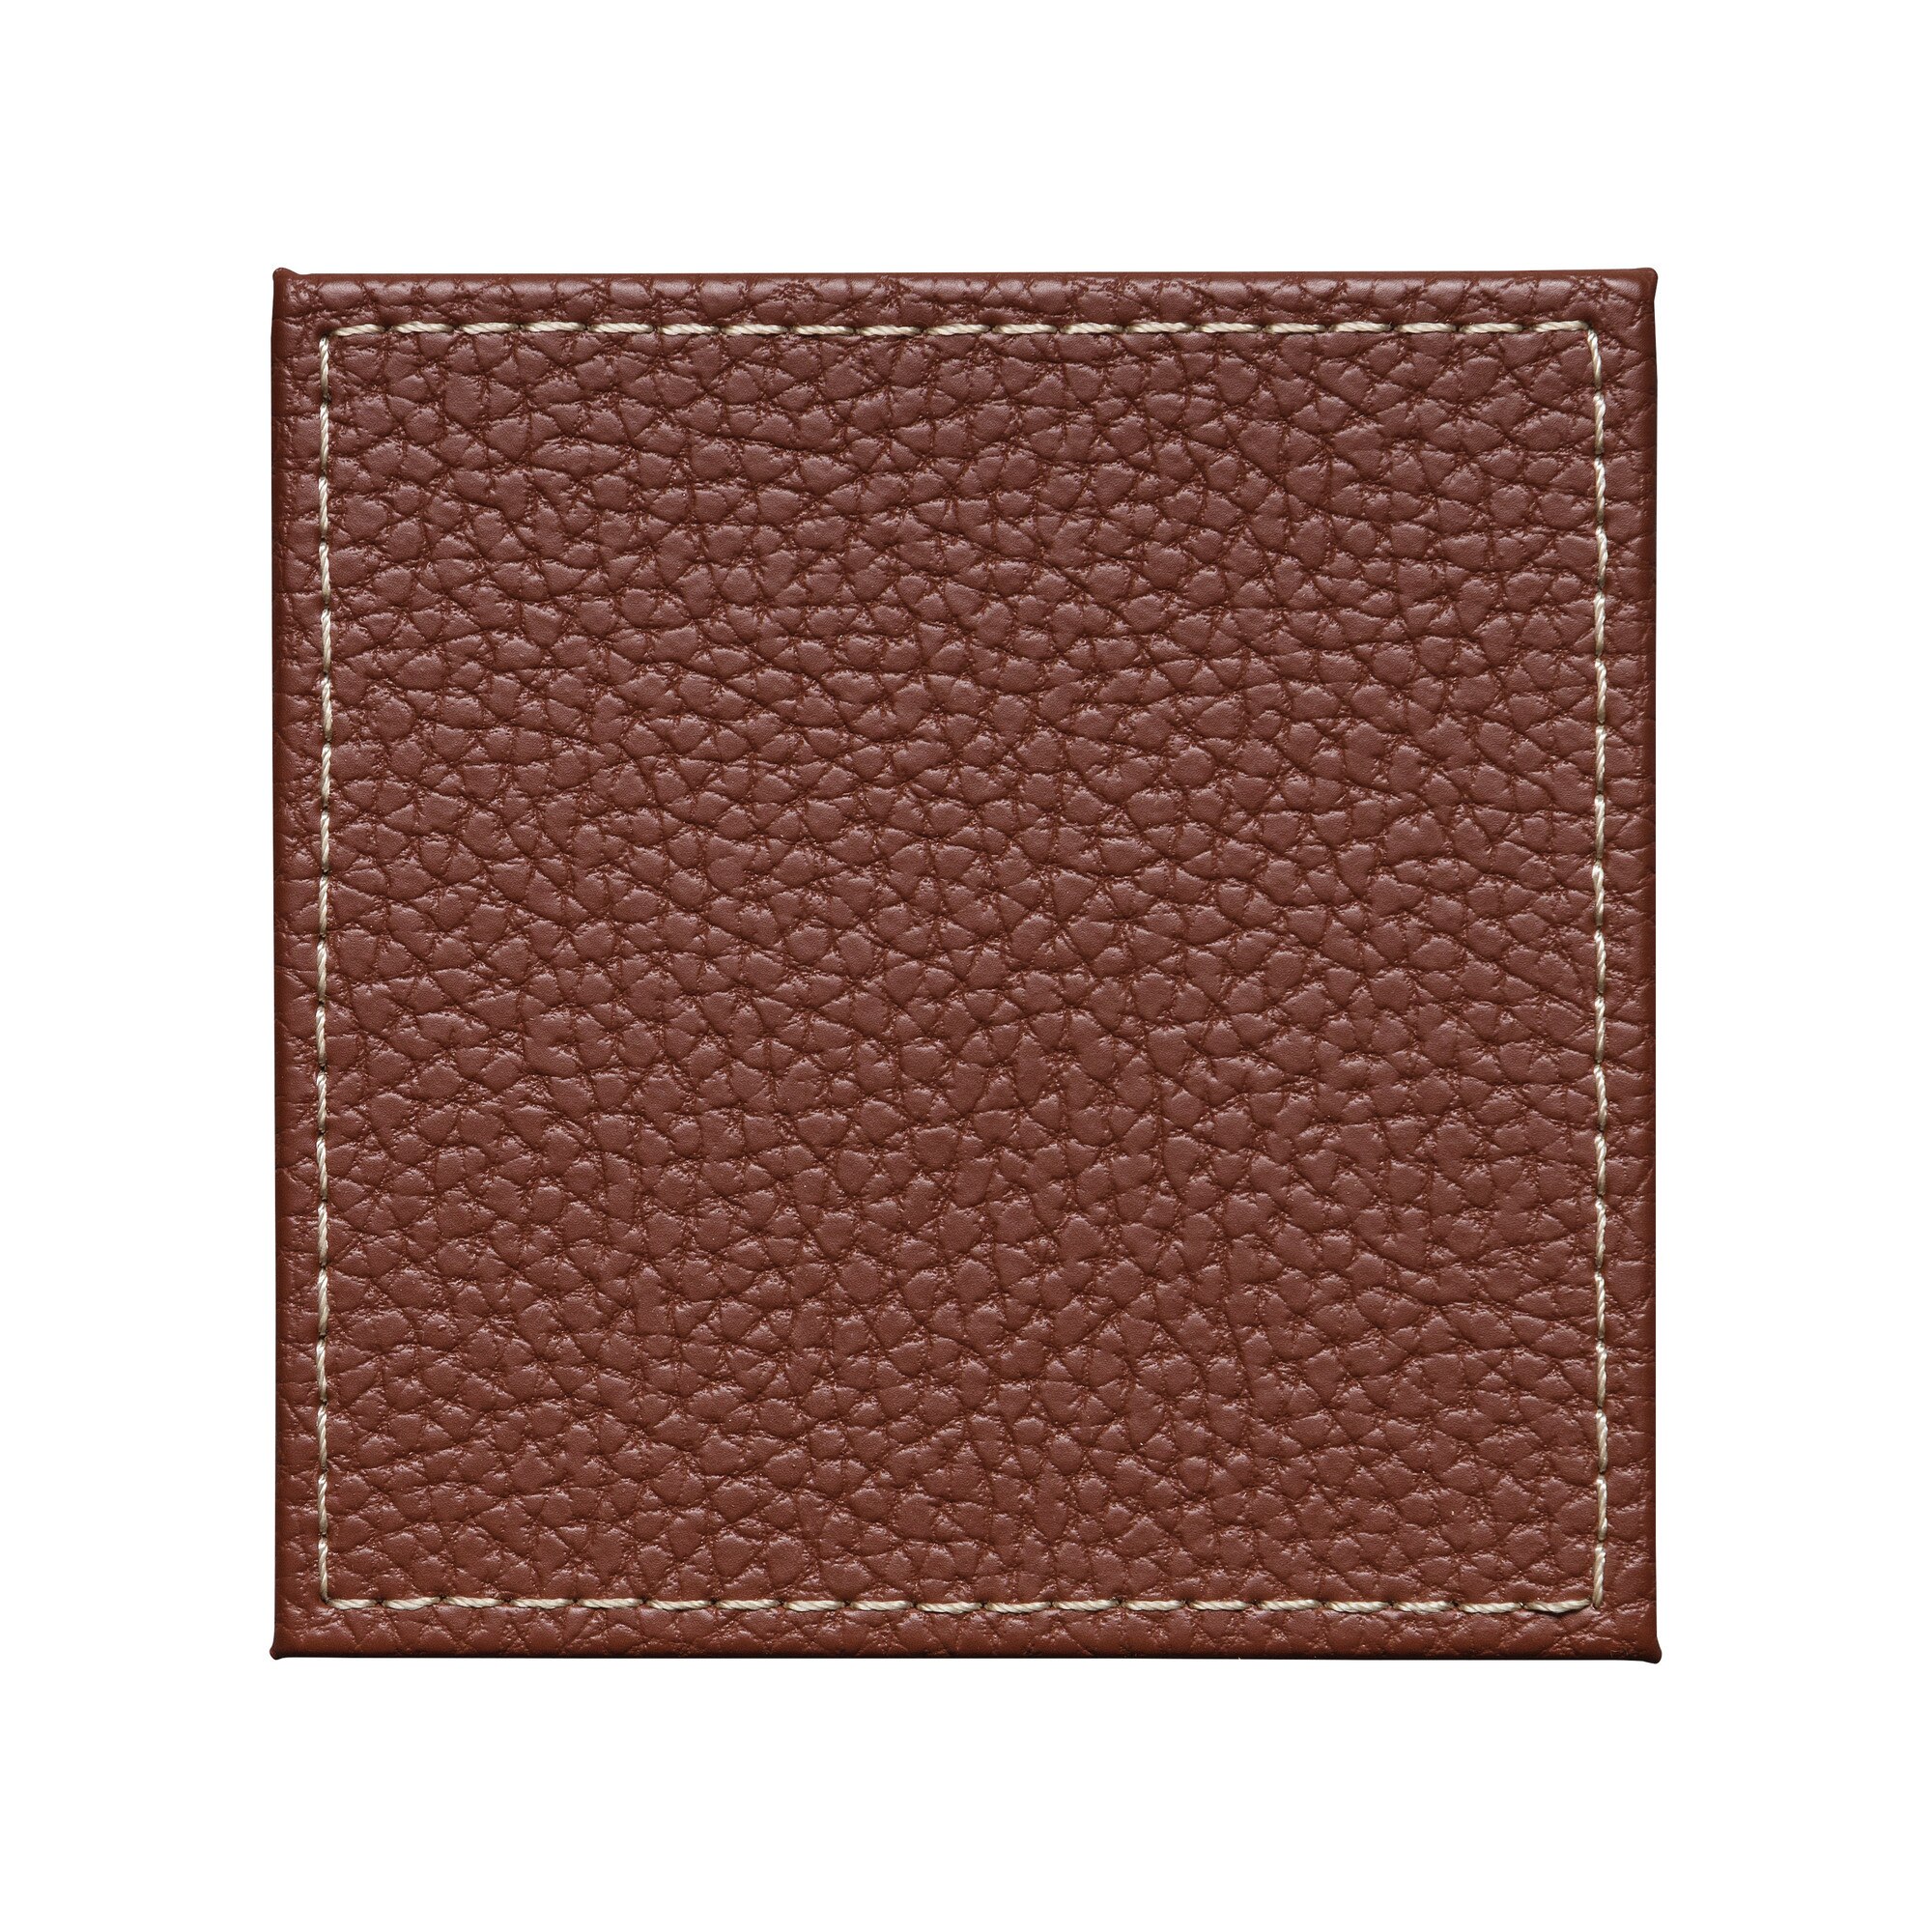 Denby Brown Faux Leather Coasters Set Of 4